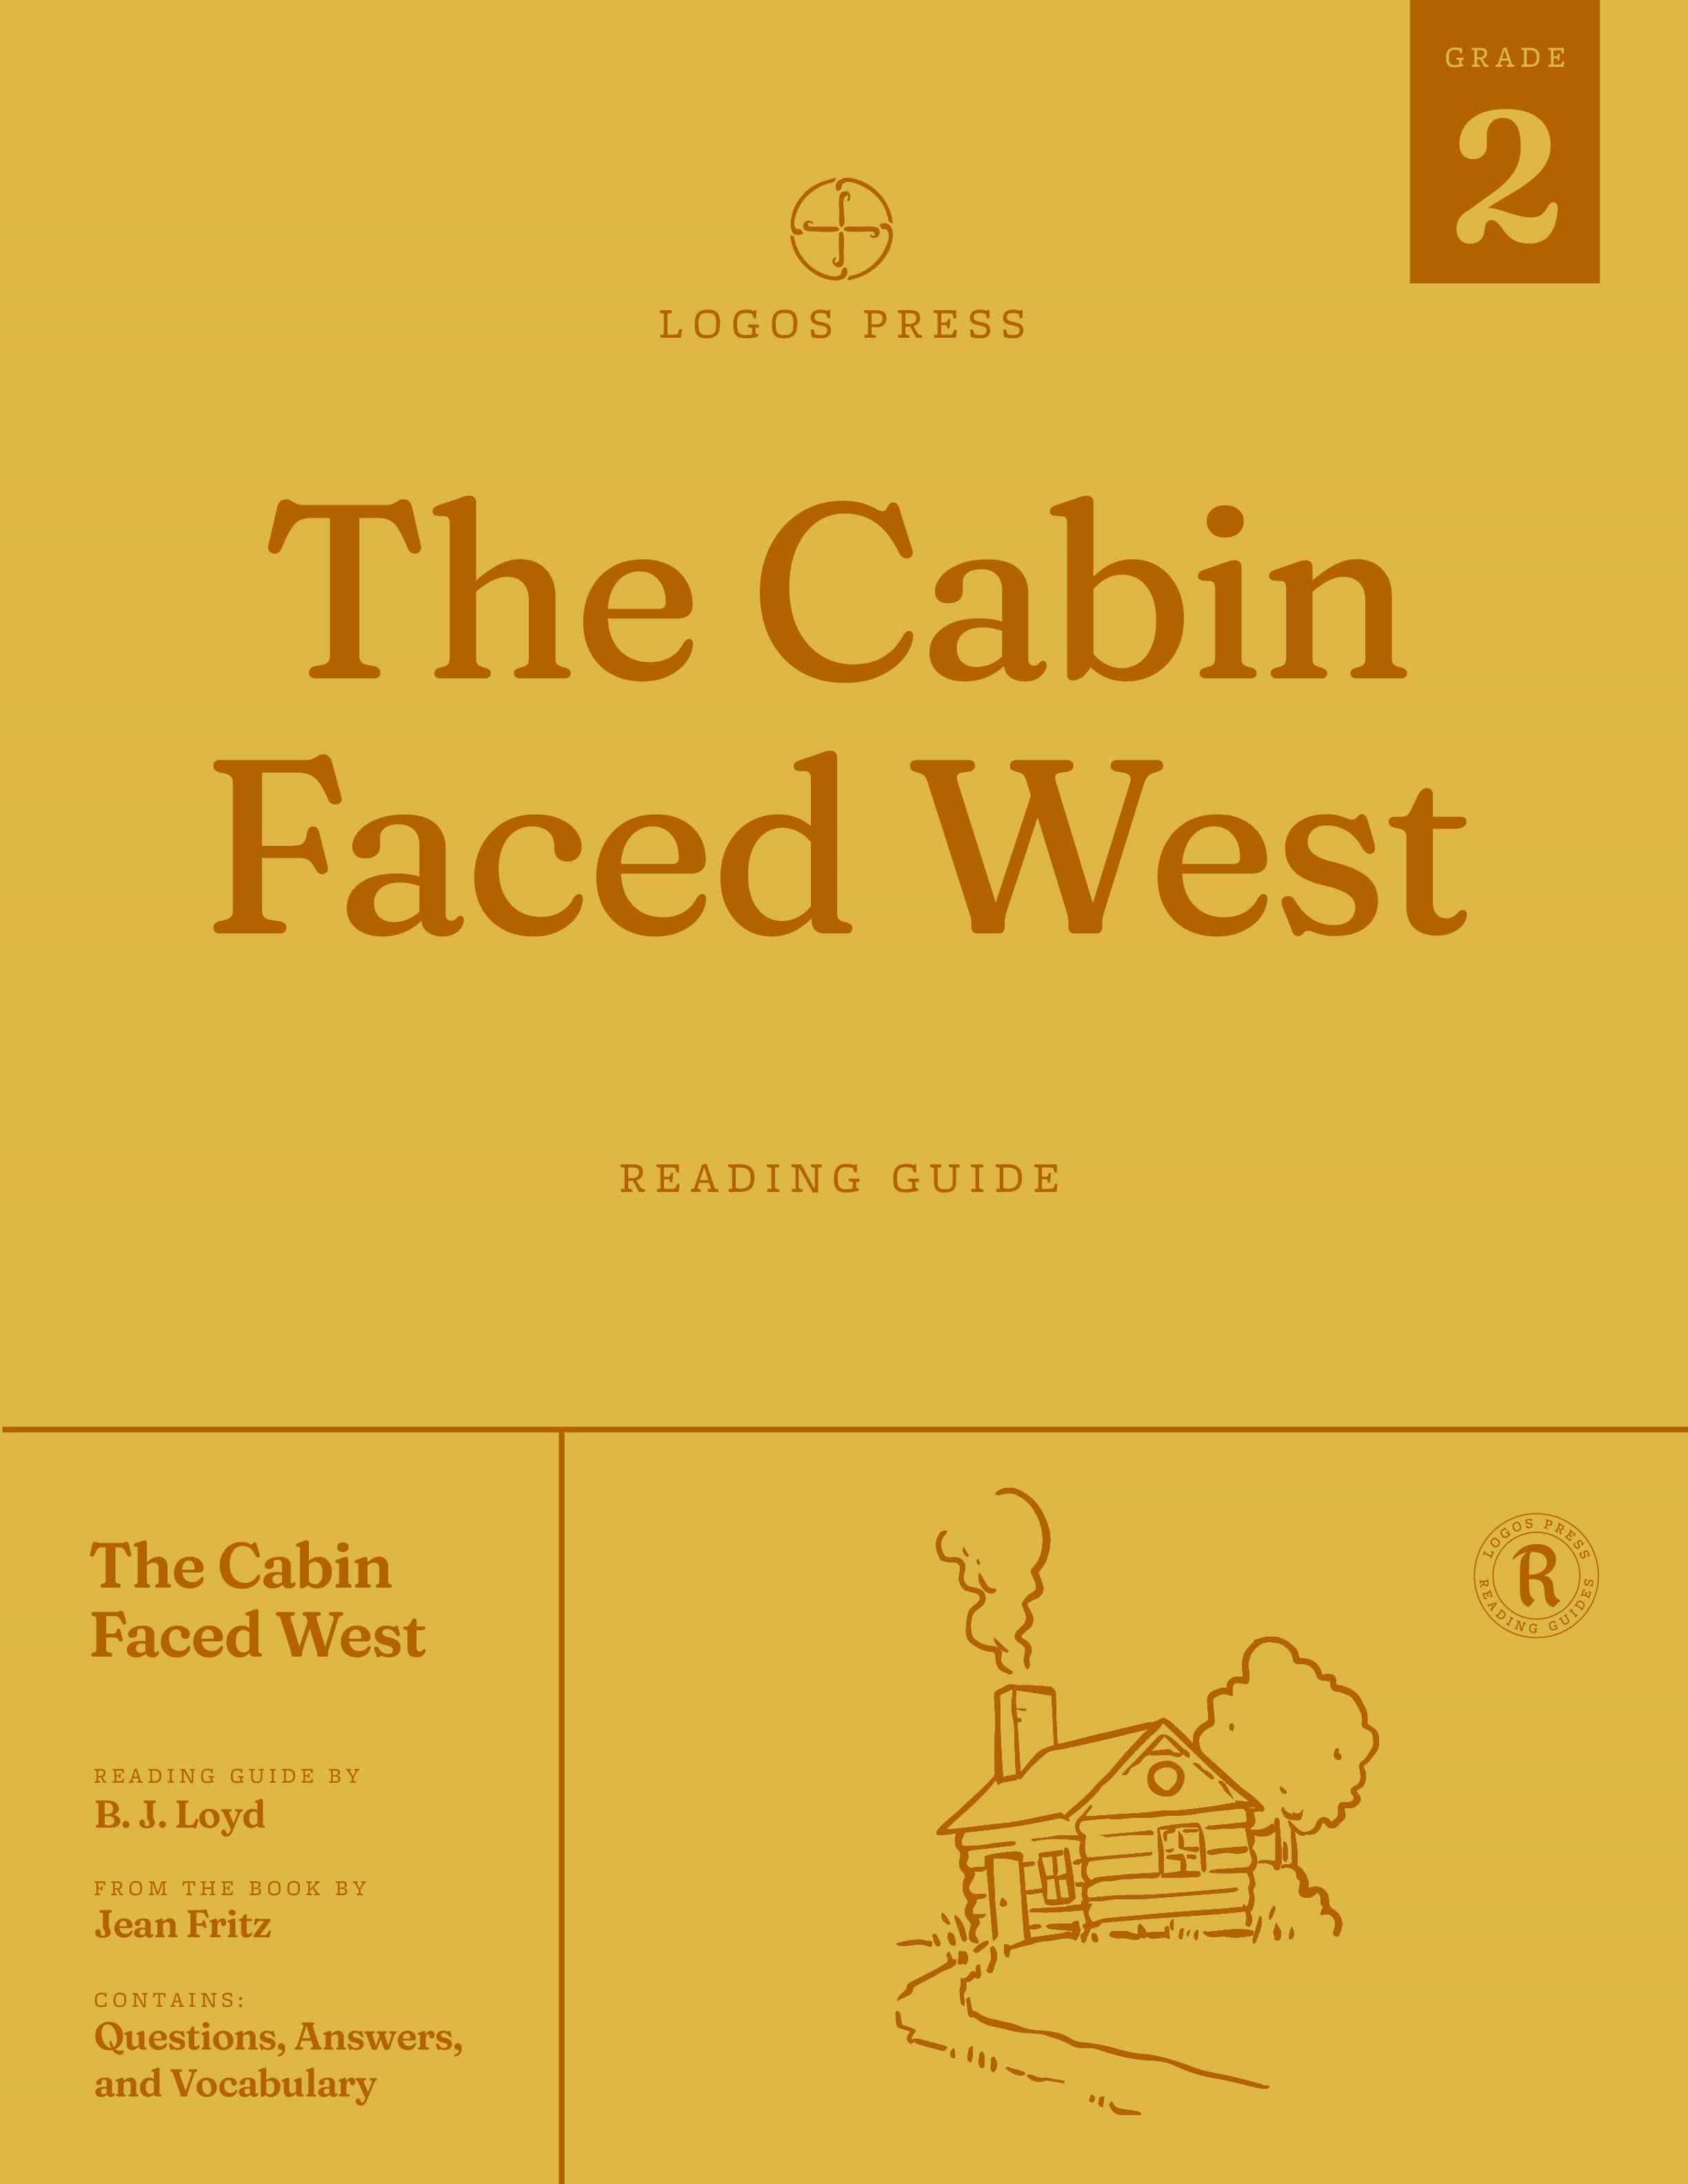 The Cabin Faced West - Reading Guide (Download)